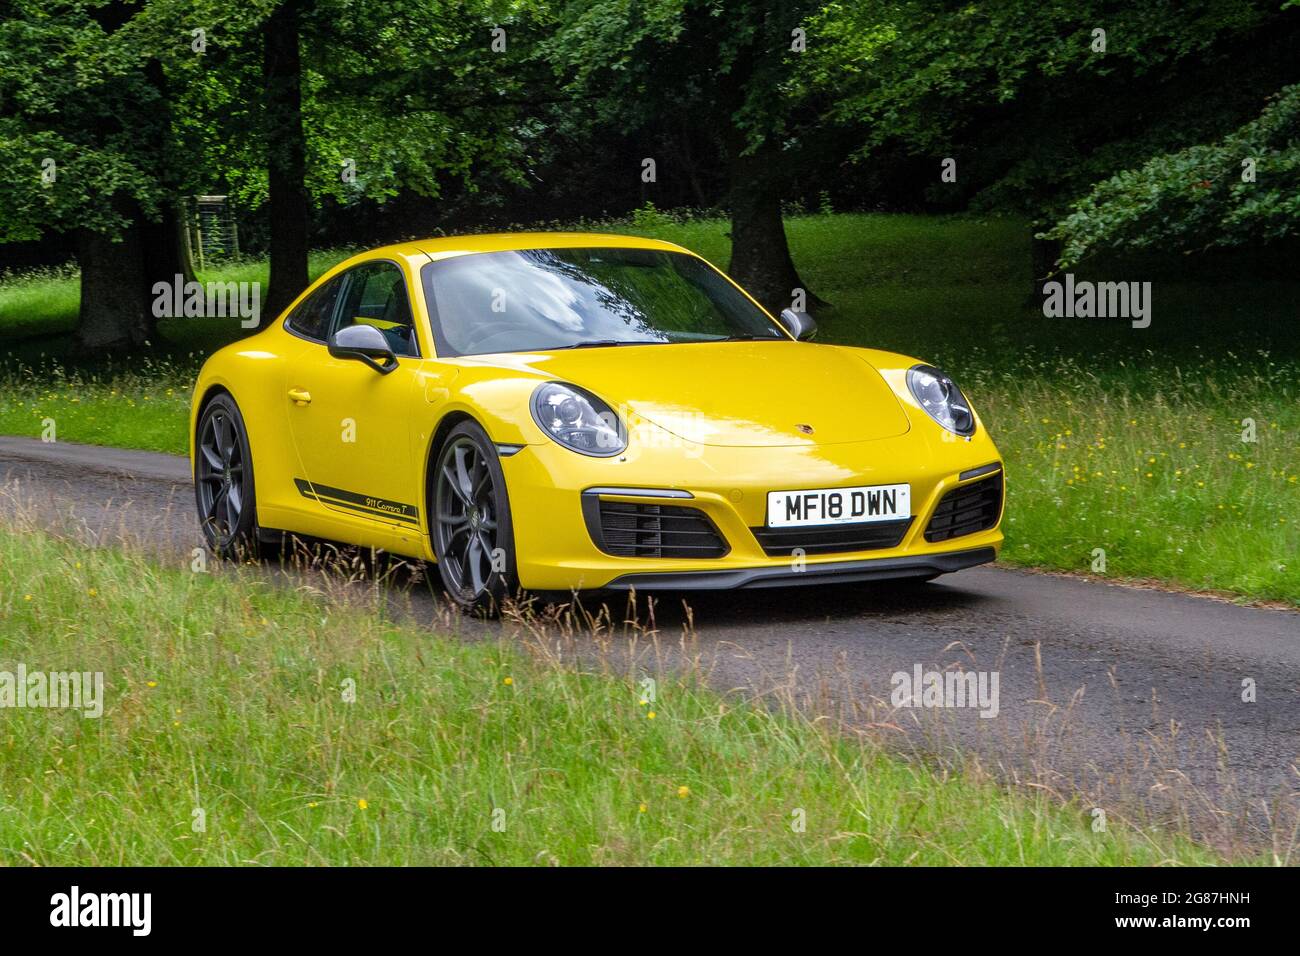 2018 yellow Porsche Carrera T 2981cc roadster at ‘The Cars the Star Show” in Holker Hall & Gardens, Grange-over-Sands, UK Stock Photo